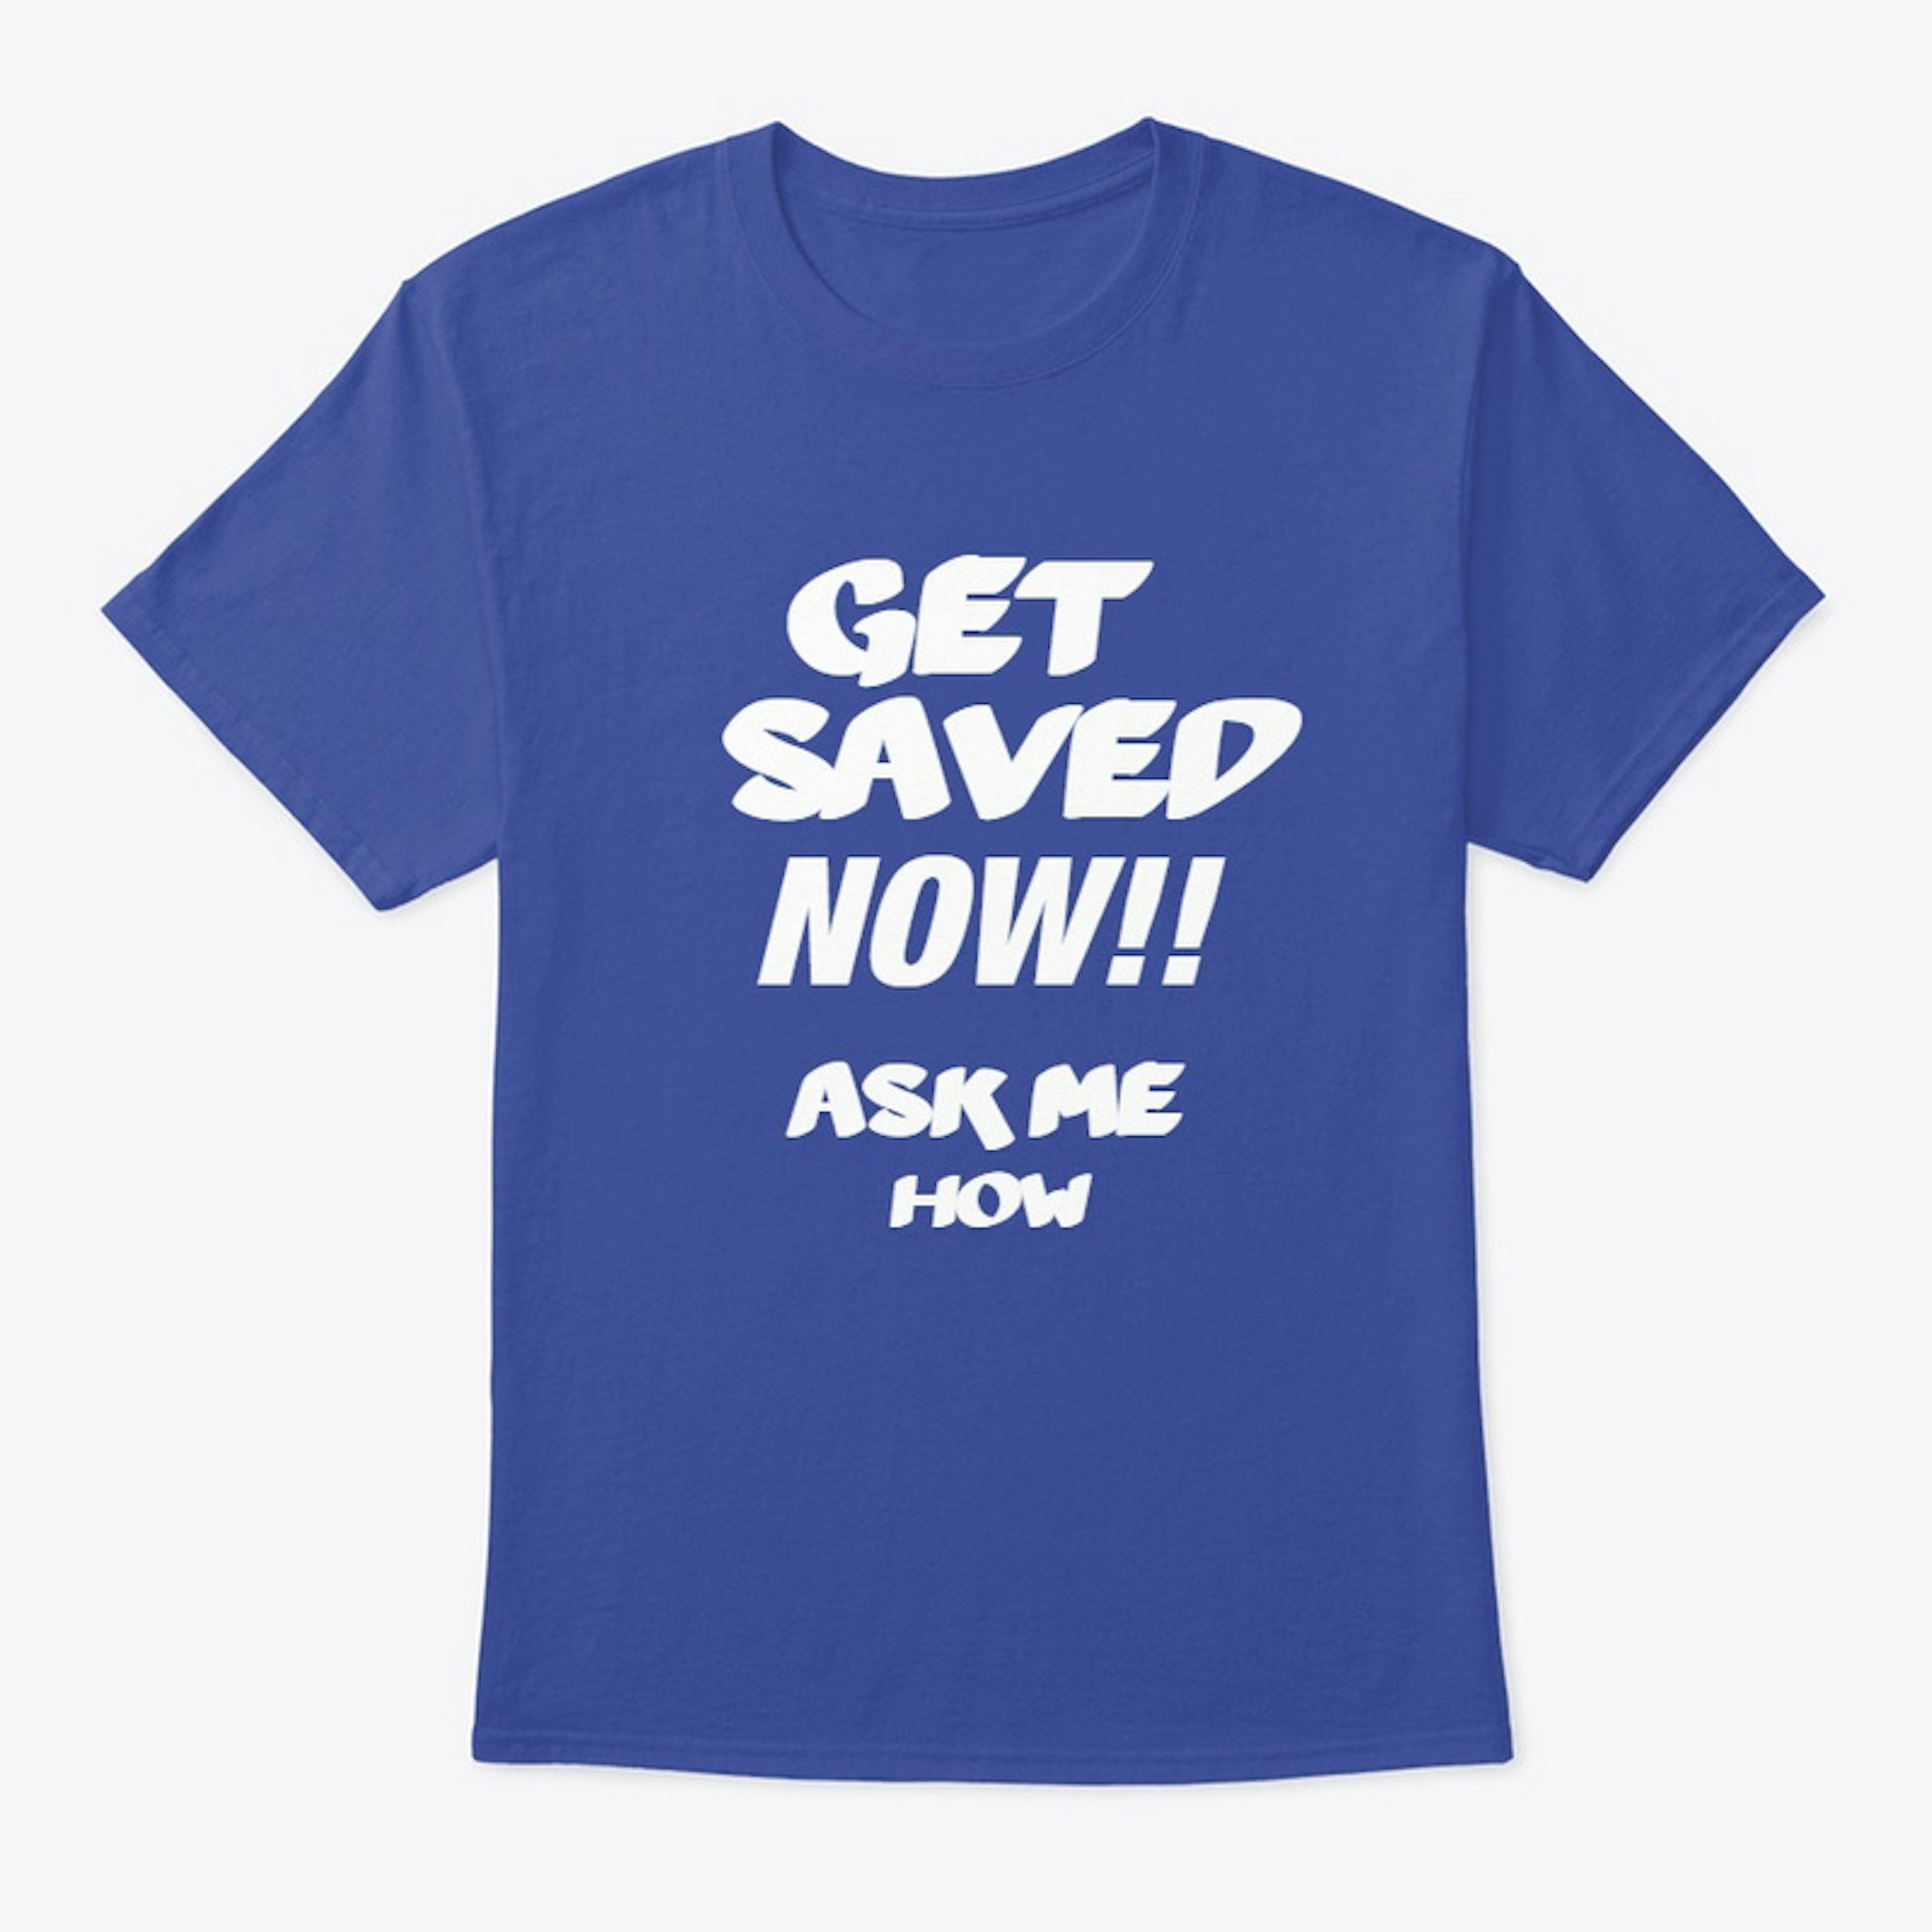 Get Saved NOW!!!